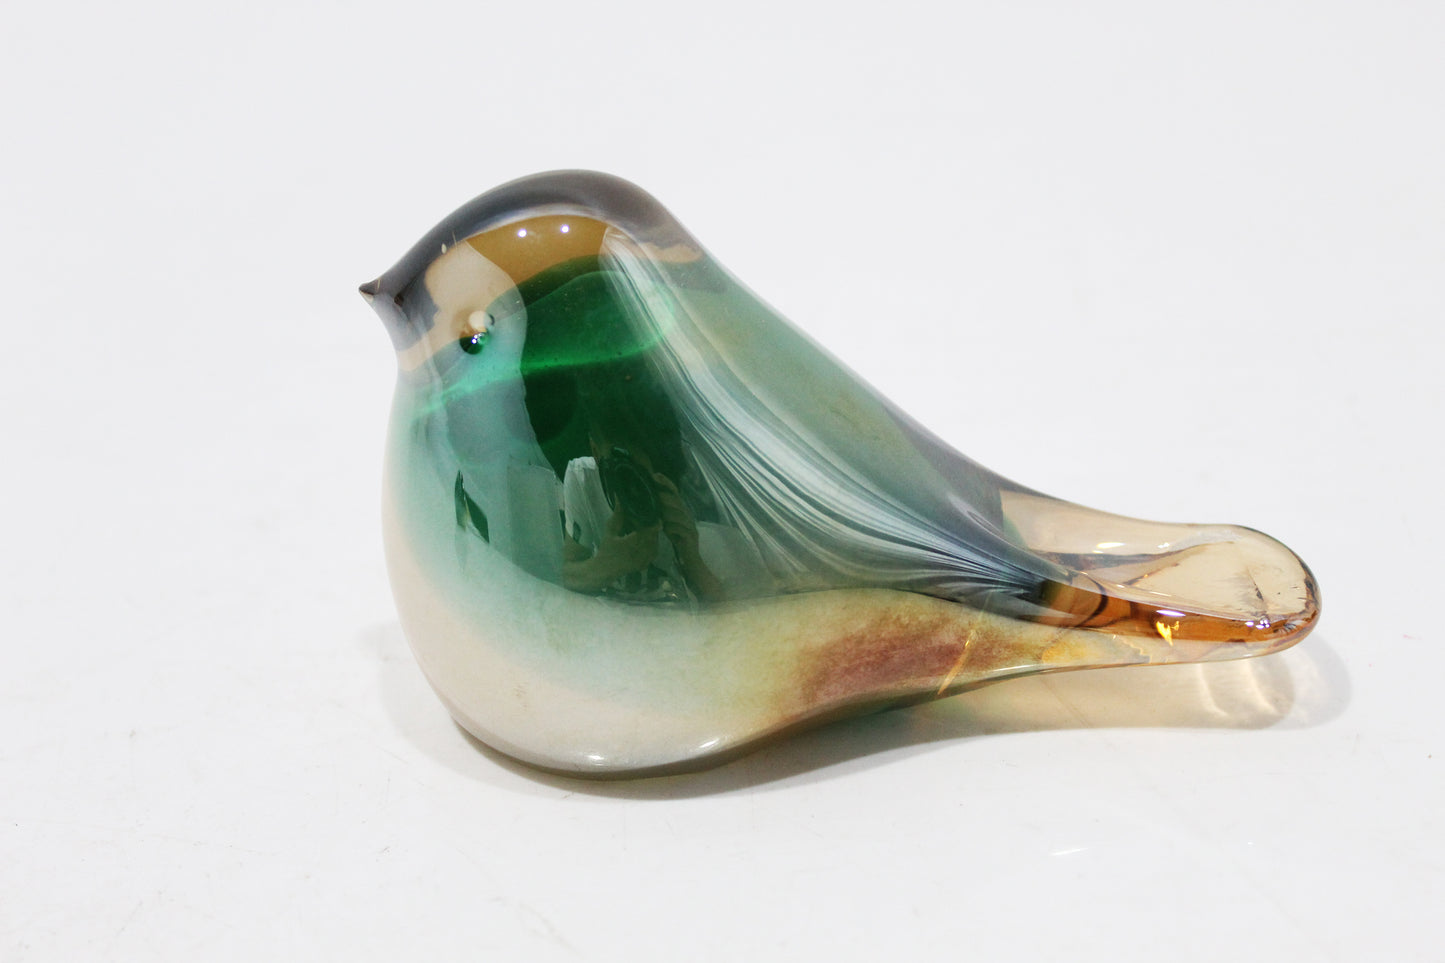 Nature's Palette - Amber & Green Glass Bird for Artistic Displays Home Decor cabinet  Sleek Contemporary Sophisticated Unique Elegant Decorative Trendy stylish Minimalist Artistic Luxury Designer tabletop table decor accessories tableware living room decor coffee table decor